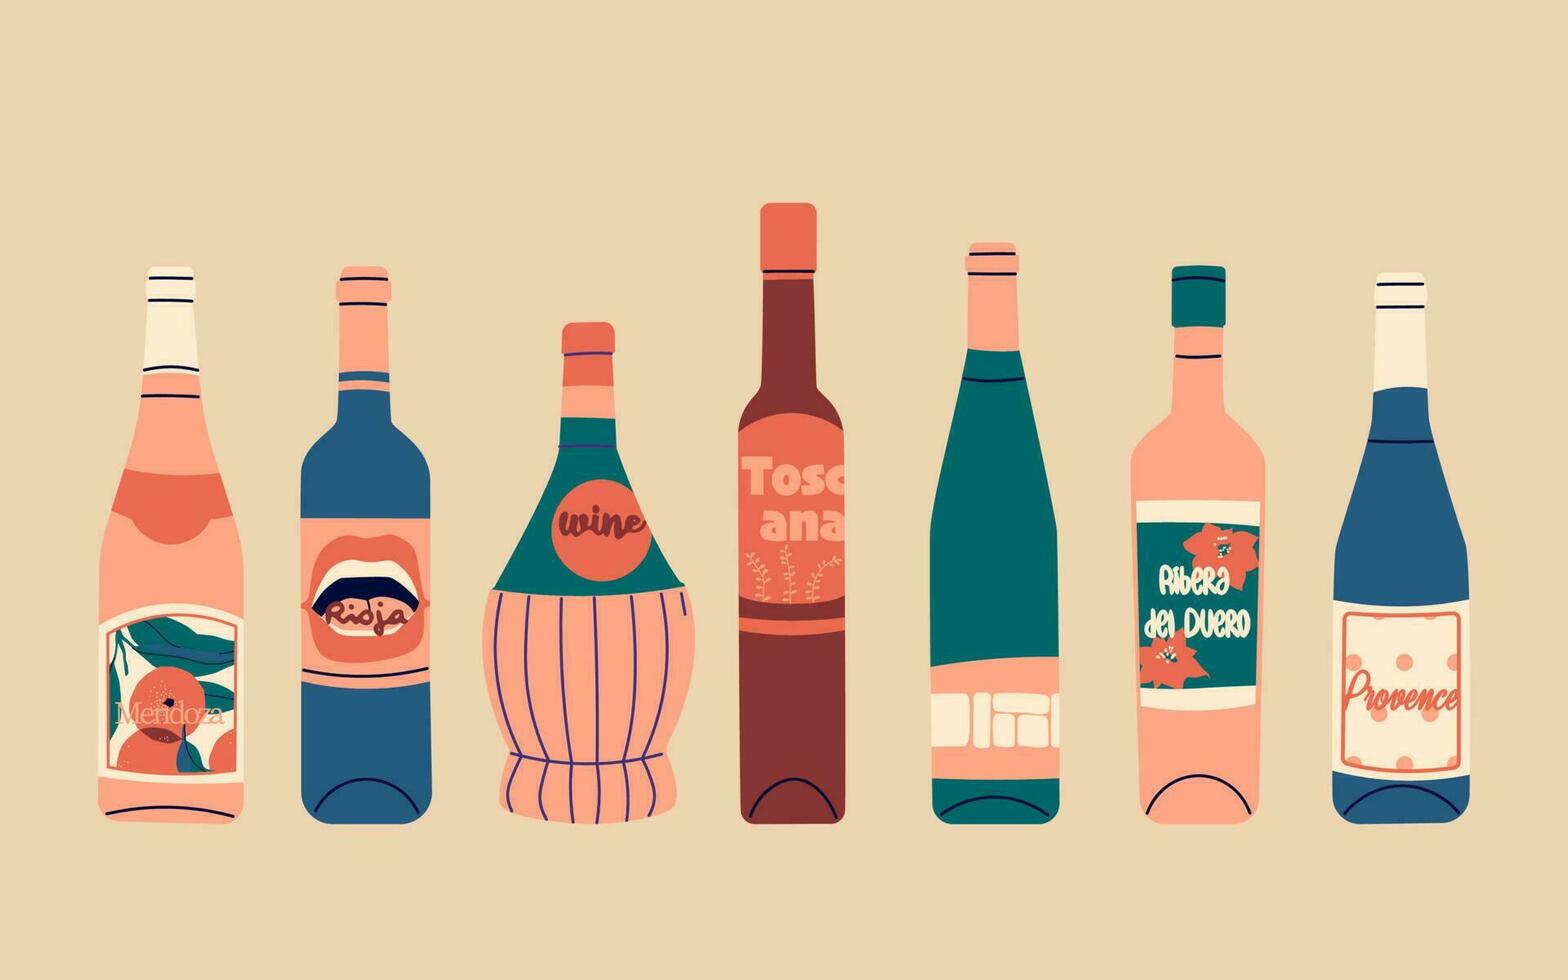 Set of vector flat bottles of wine. Labels with the names of wine-producing regions - Mendoza, Rioja, Tuscany, Ribera del Duero, Provence. Illustration for bar or restaurant menu design.